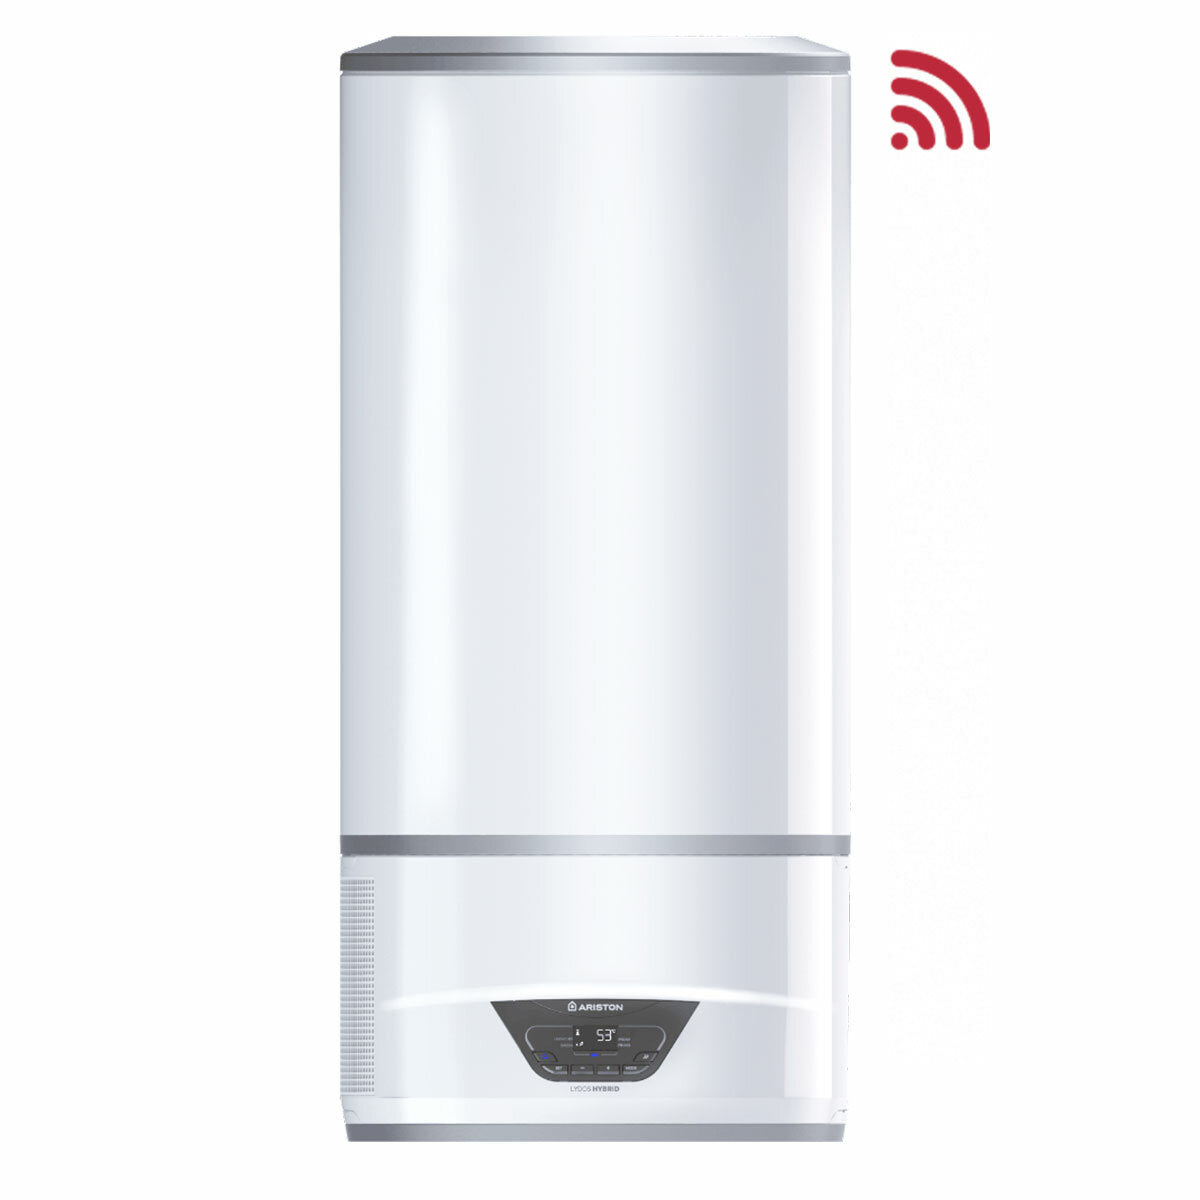 Ariston Lydos Hybrid electric water heater and hybrid heat pump 80 liters with WiFi